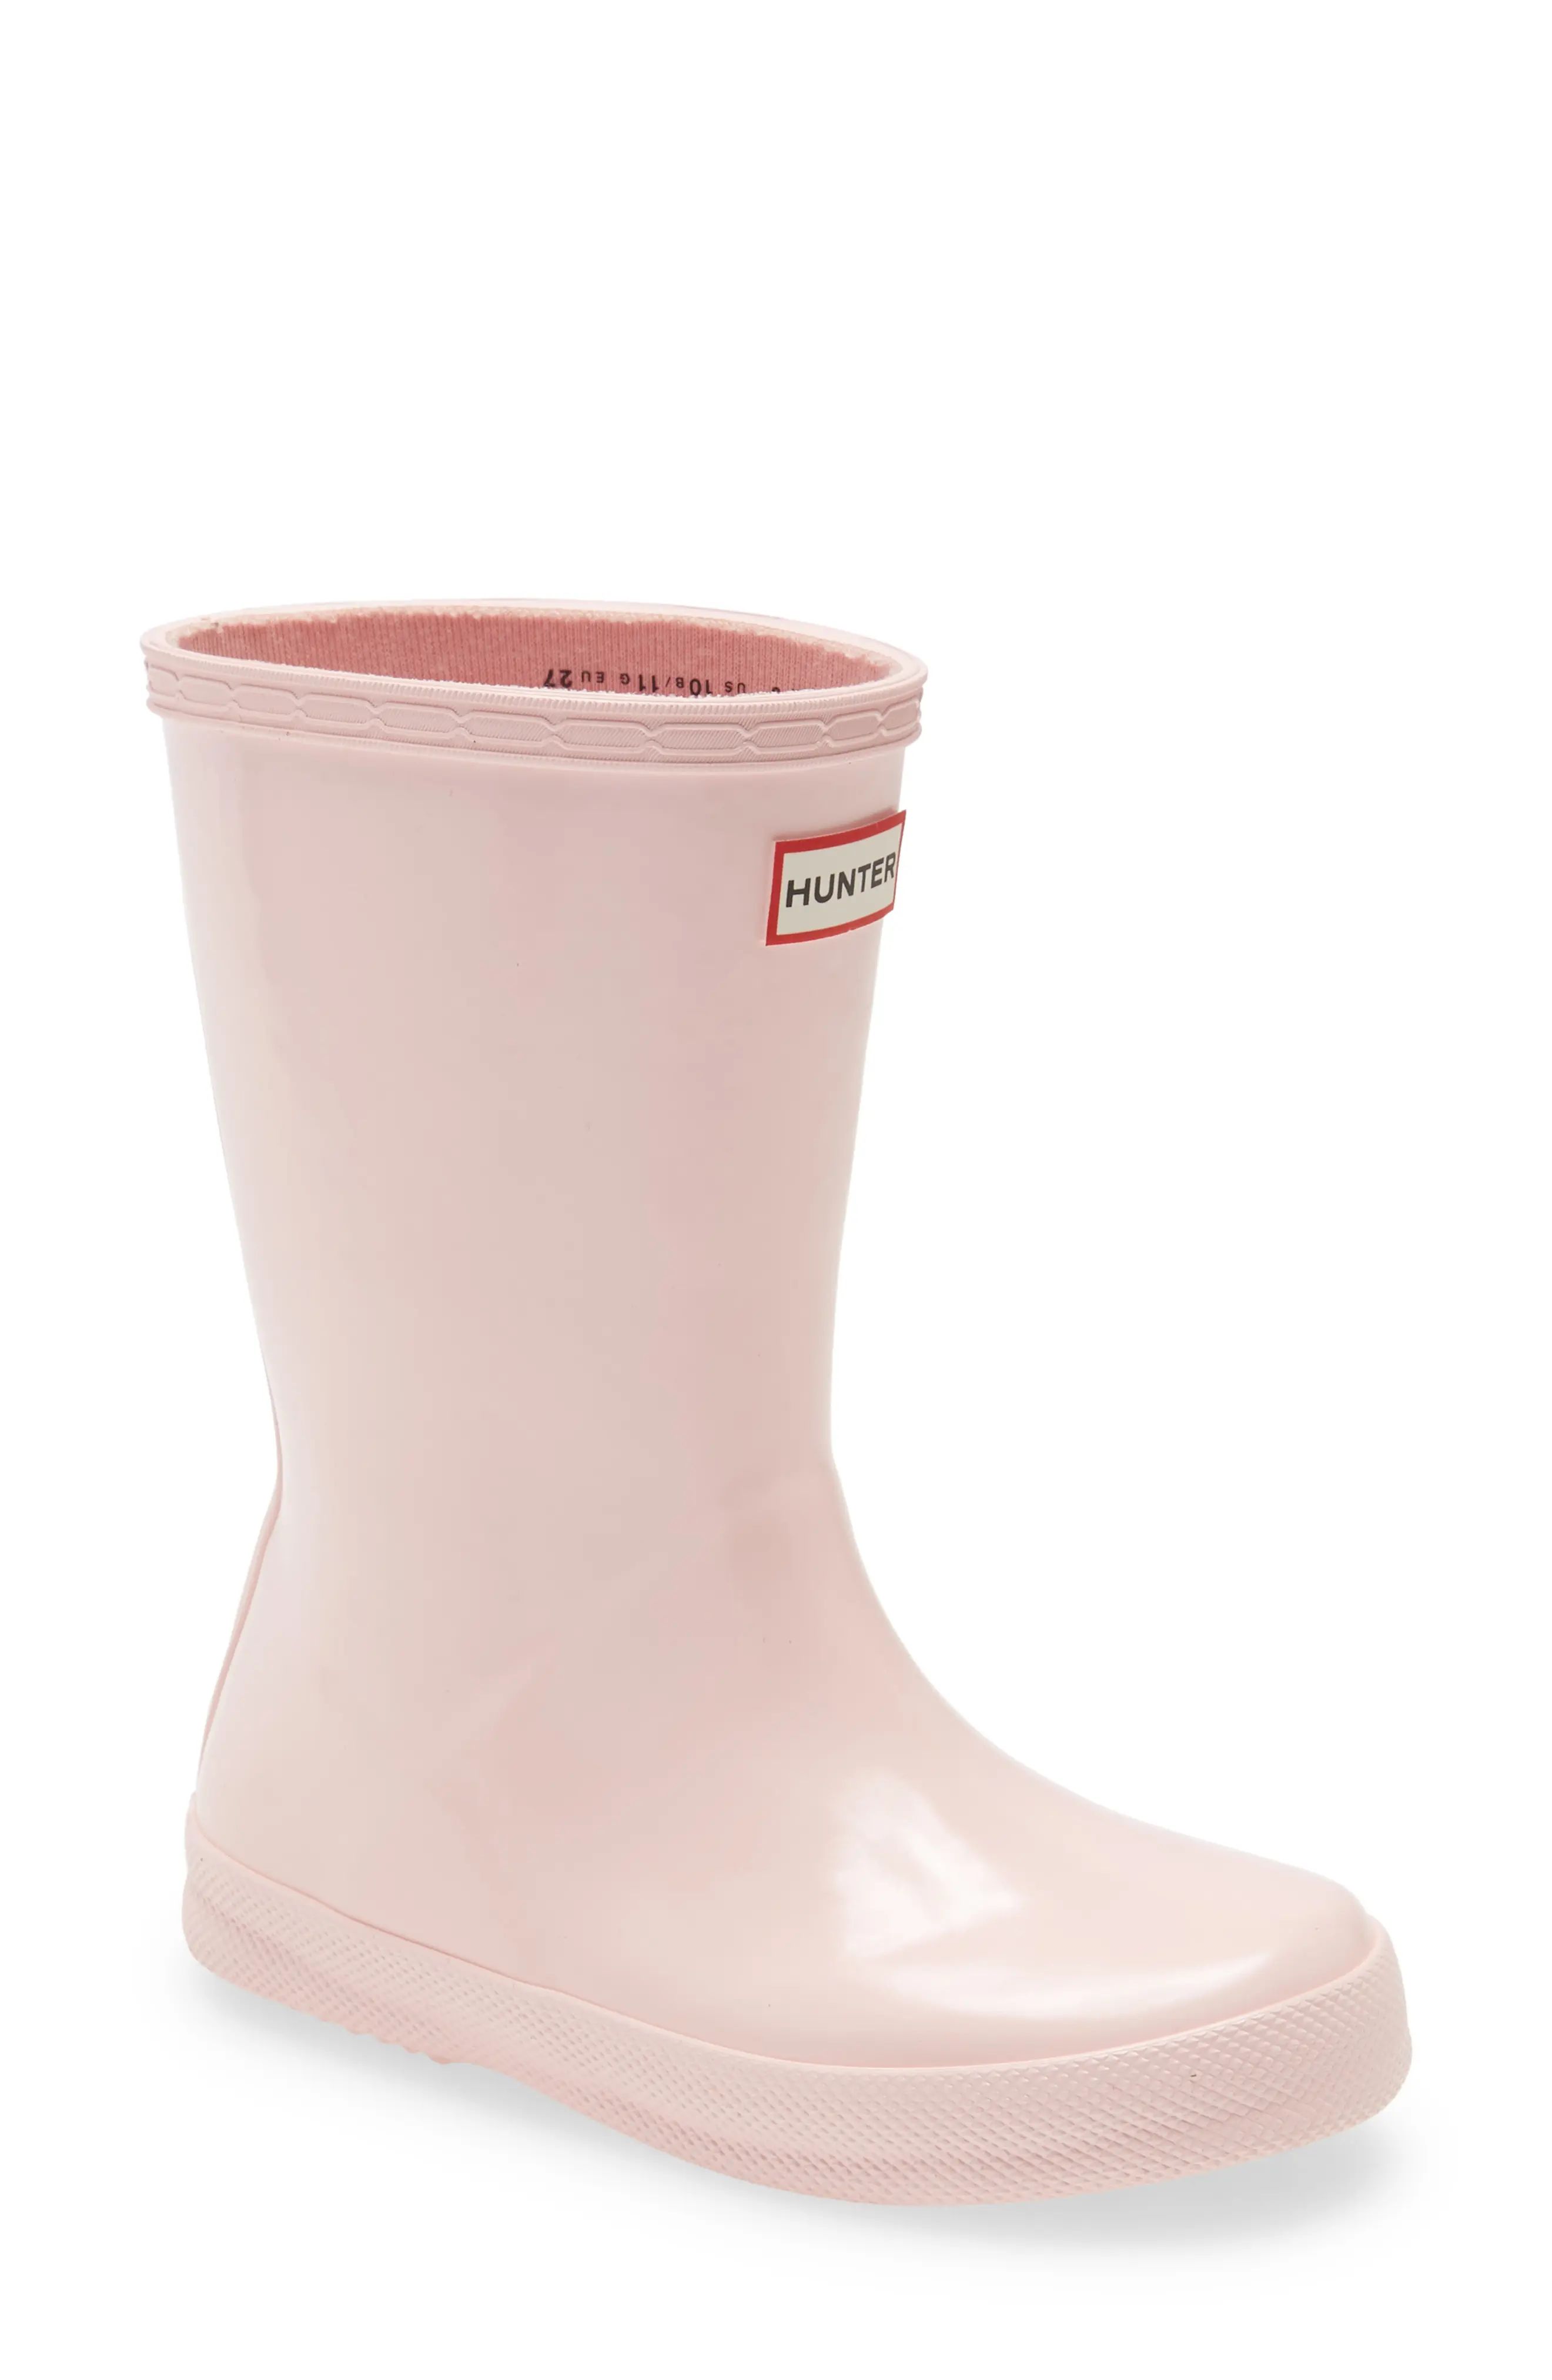 Hunter 'First Gloss' Rain Boot in Salt Pink at Nordstrom, Size 9 M | Nordstrom